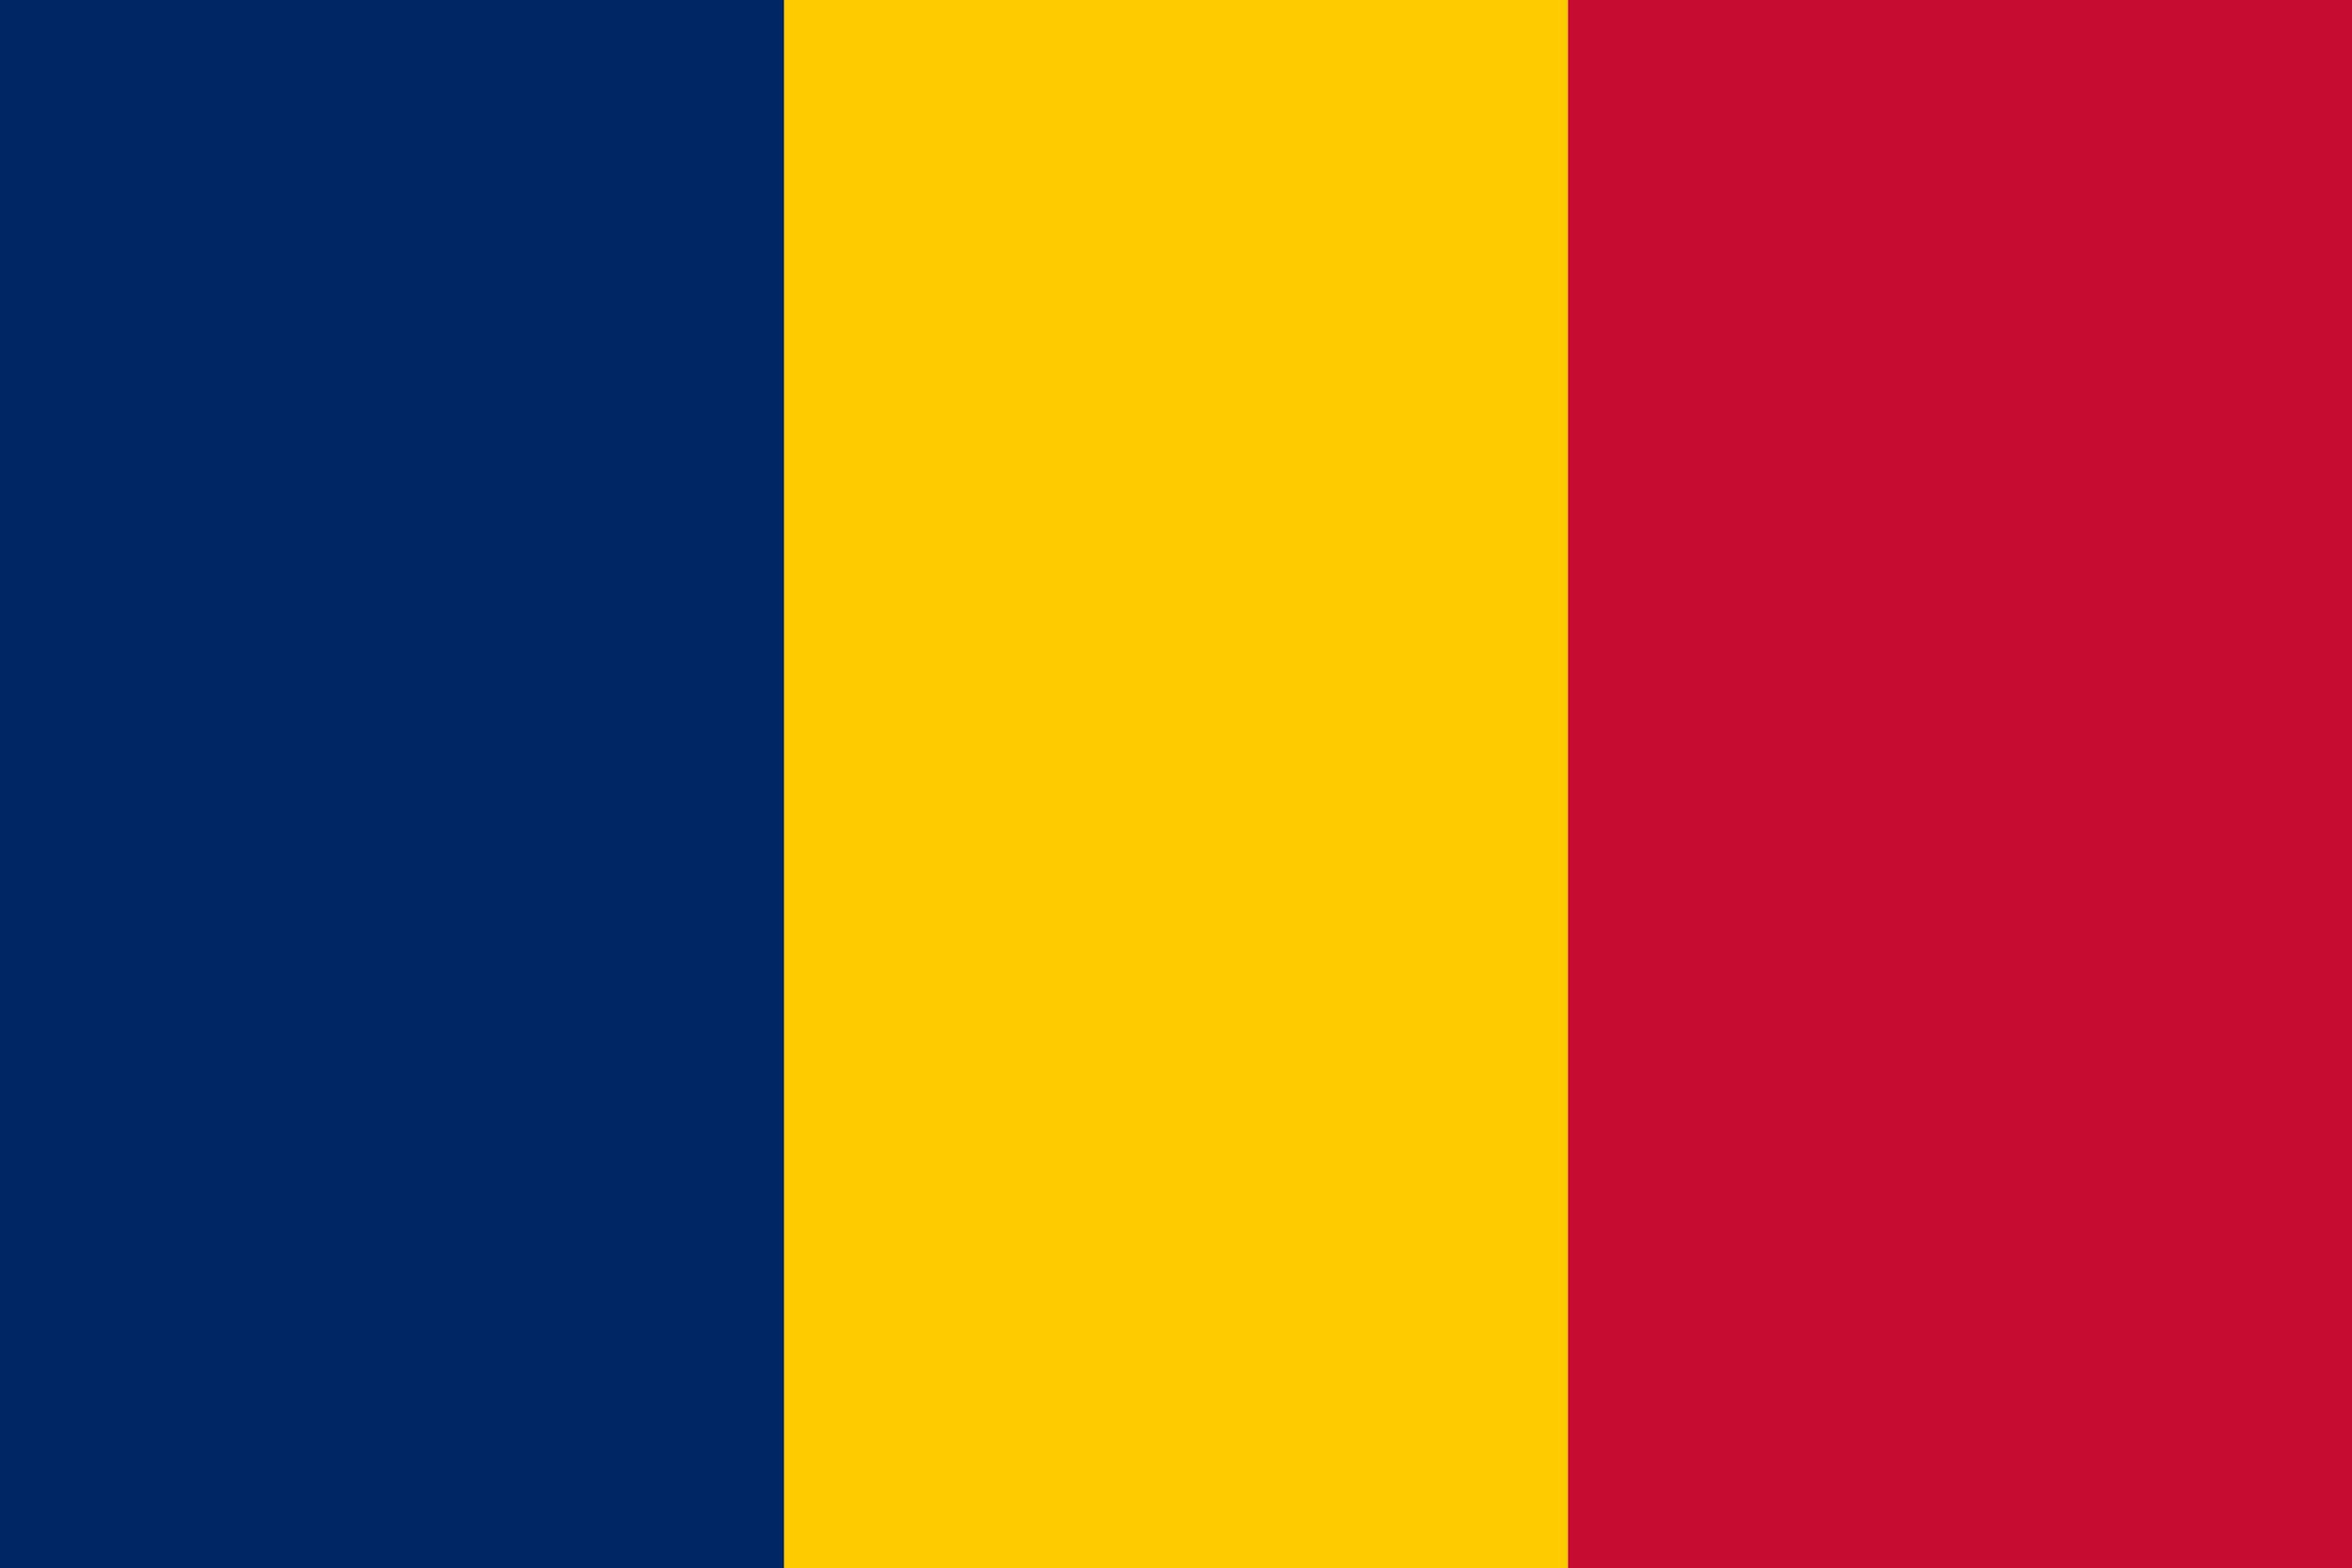 A vertical tricolor flag with dark blue, yellow, and red stripes.